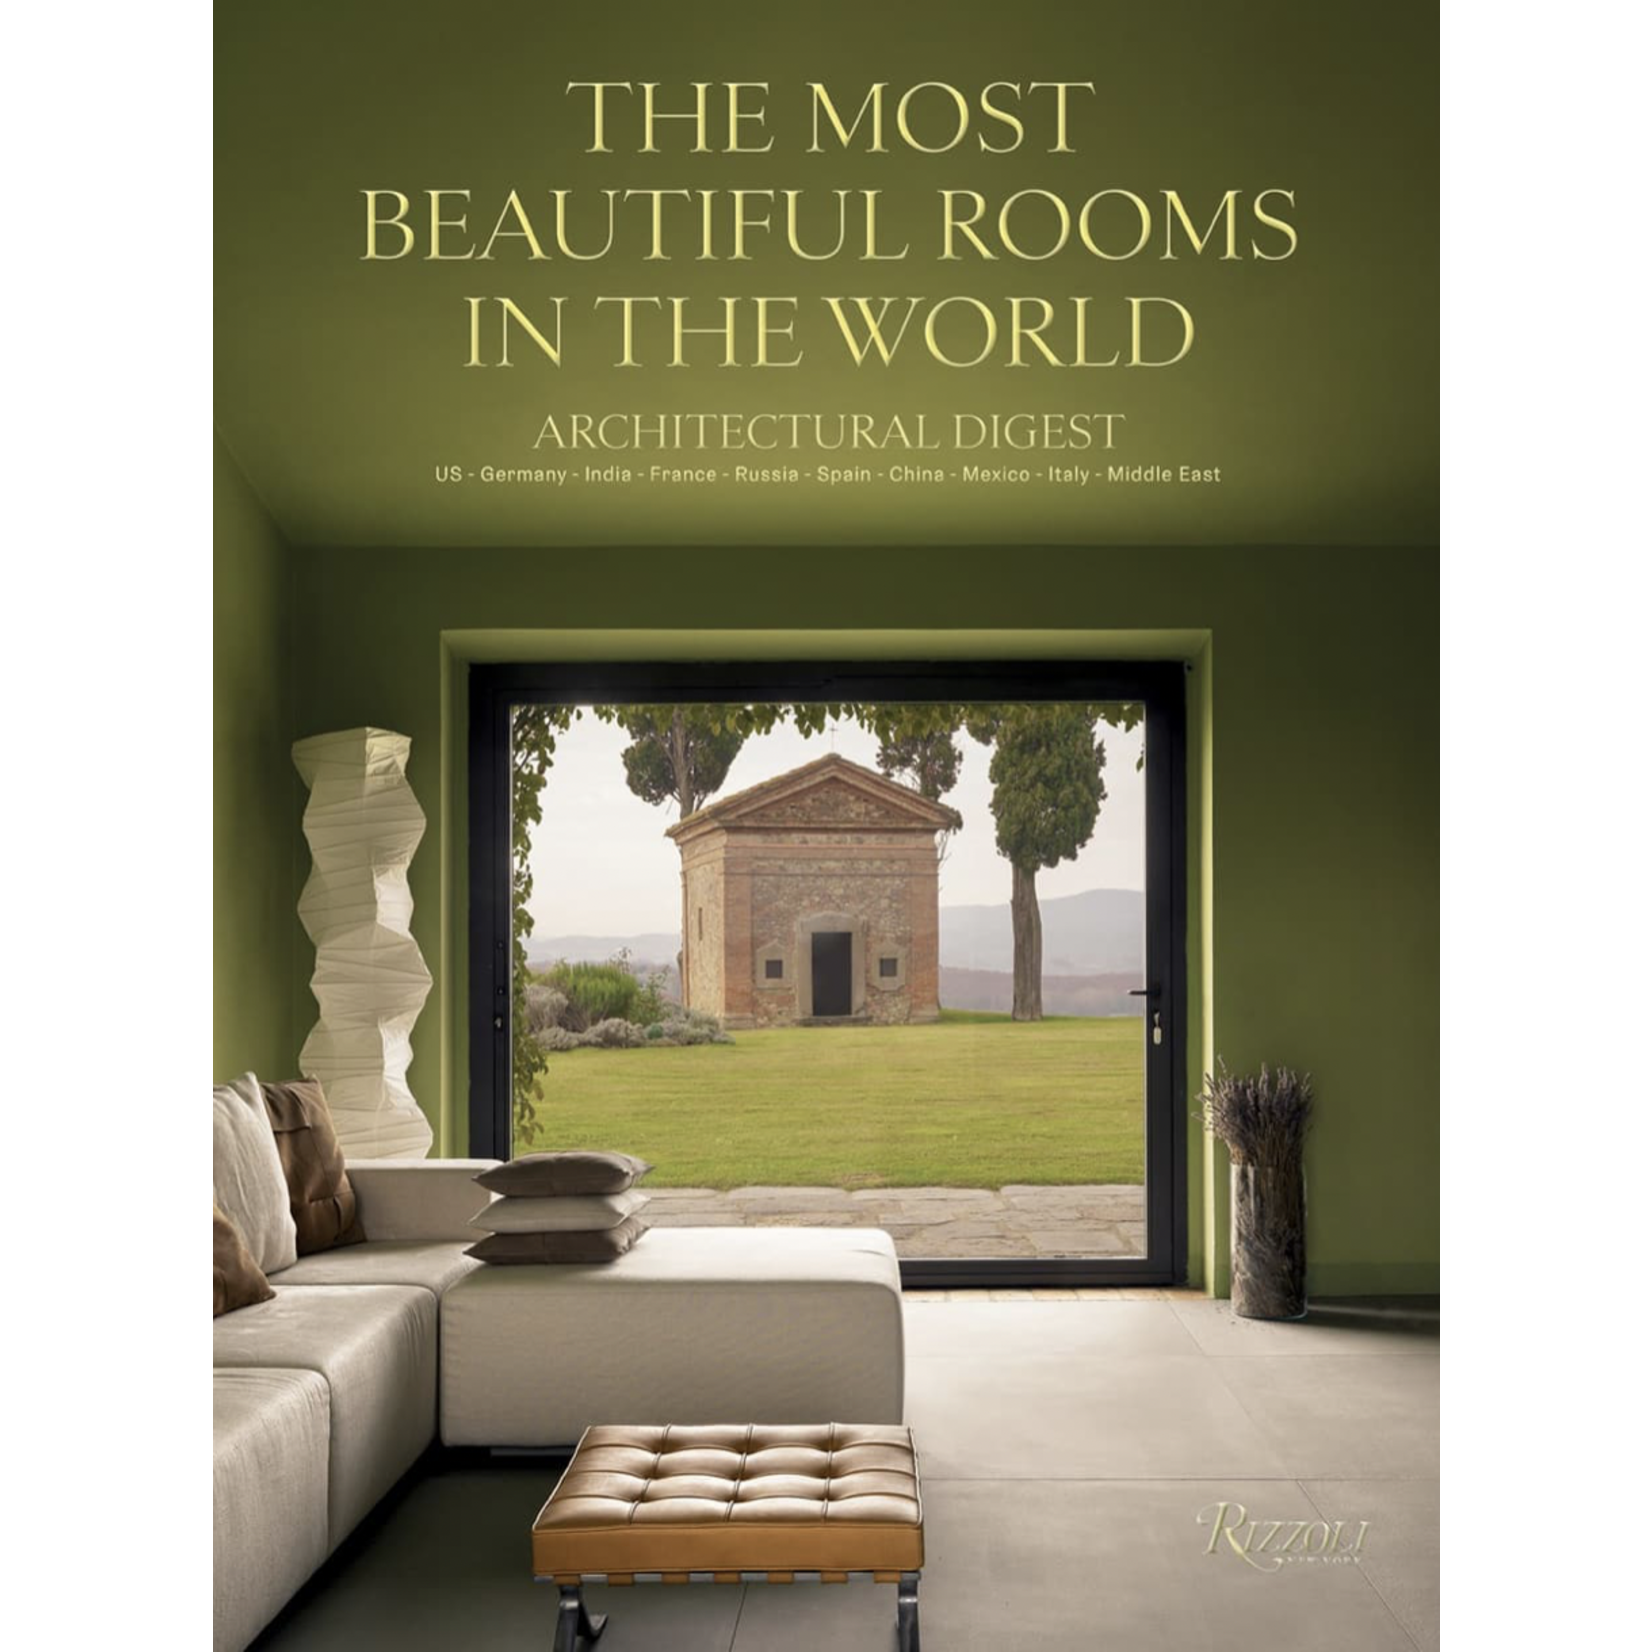 Common Ground Architectural Digest: The Most Beautiful Rooms in the World